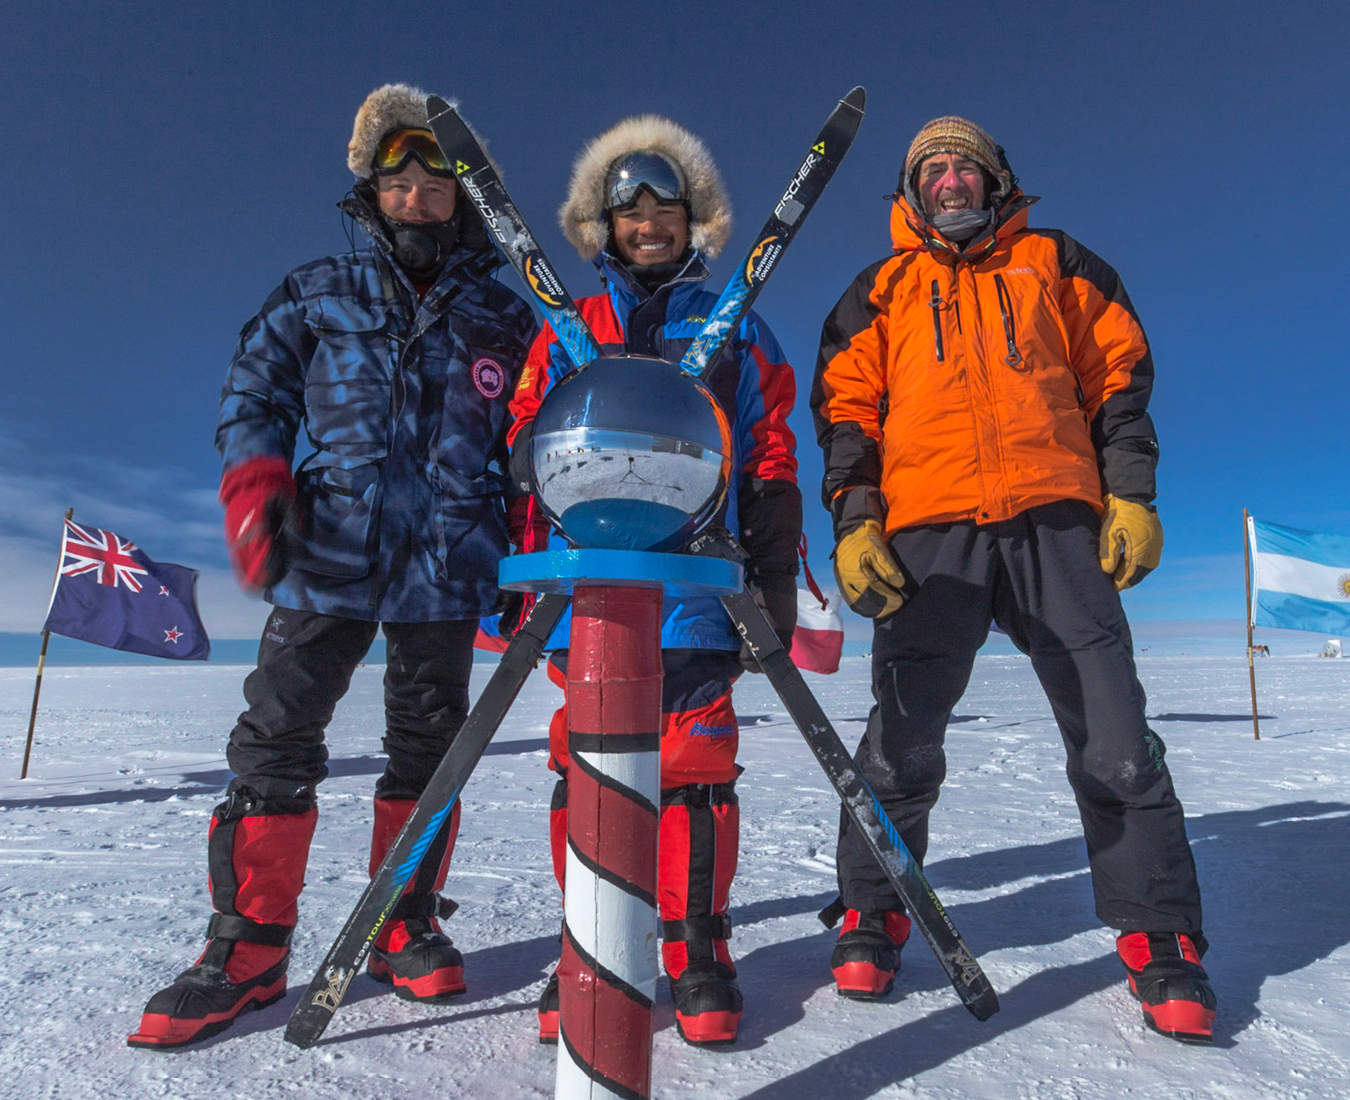 Reaching the South Pole after crossing 60 nautical miles of Antarctic wilderness, photo by Andy Cole.